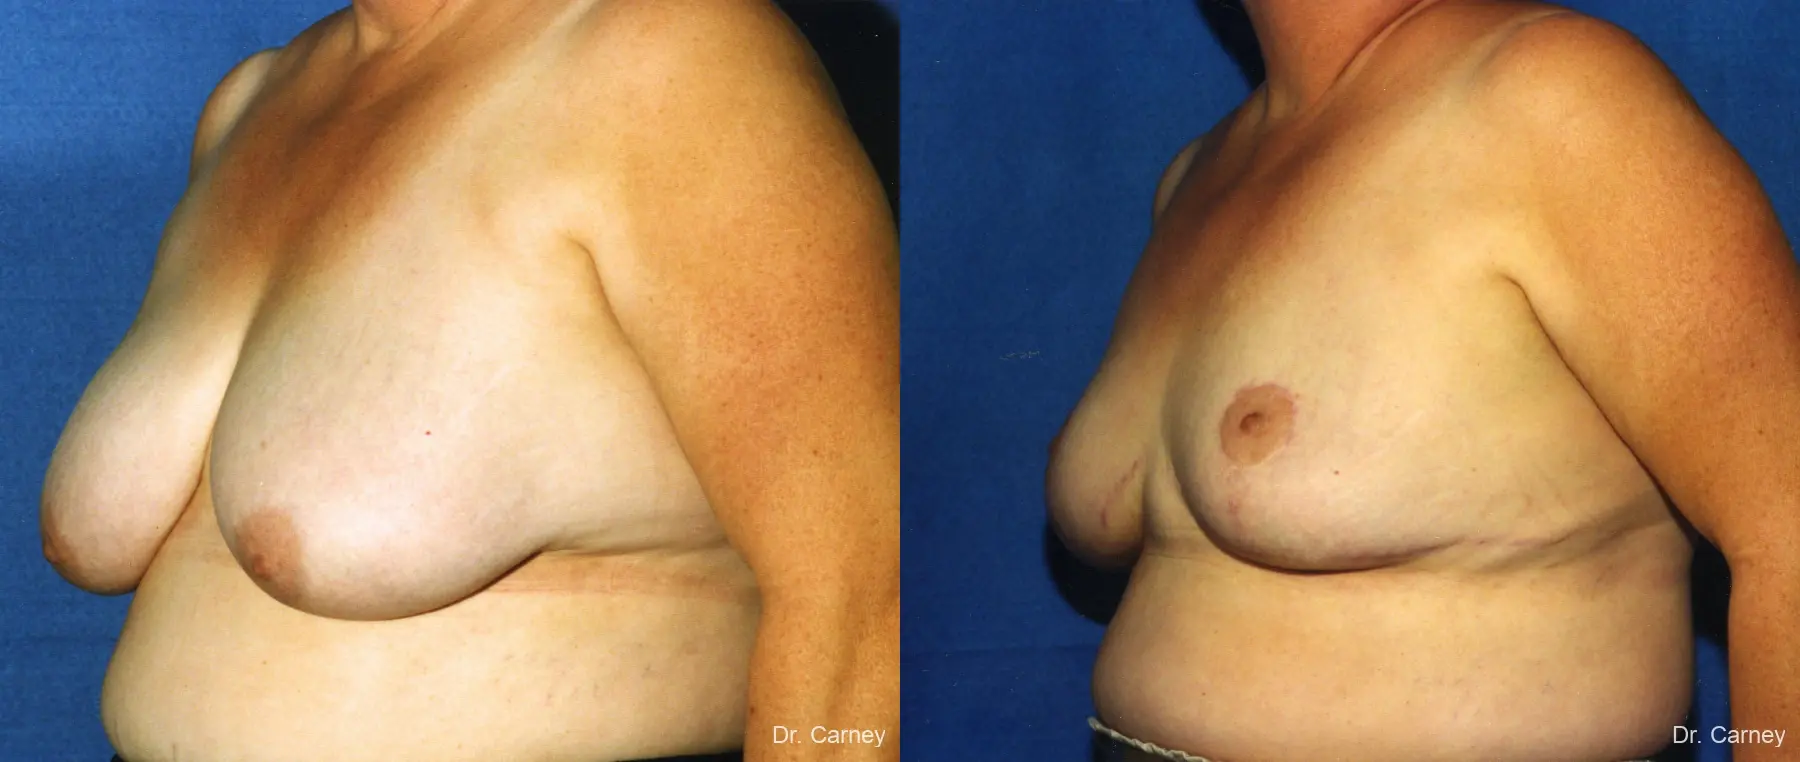 Virginia Beach Breast Reduction 1234 - Before and After 3